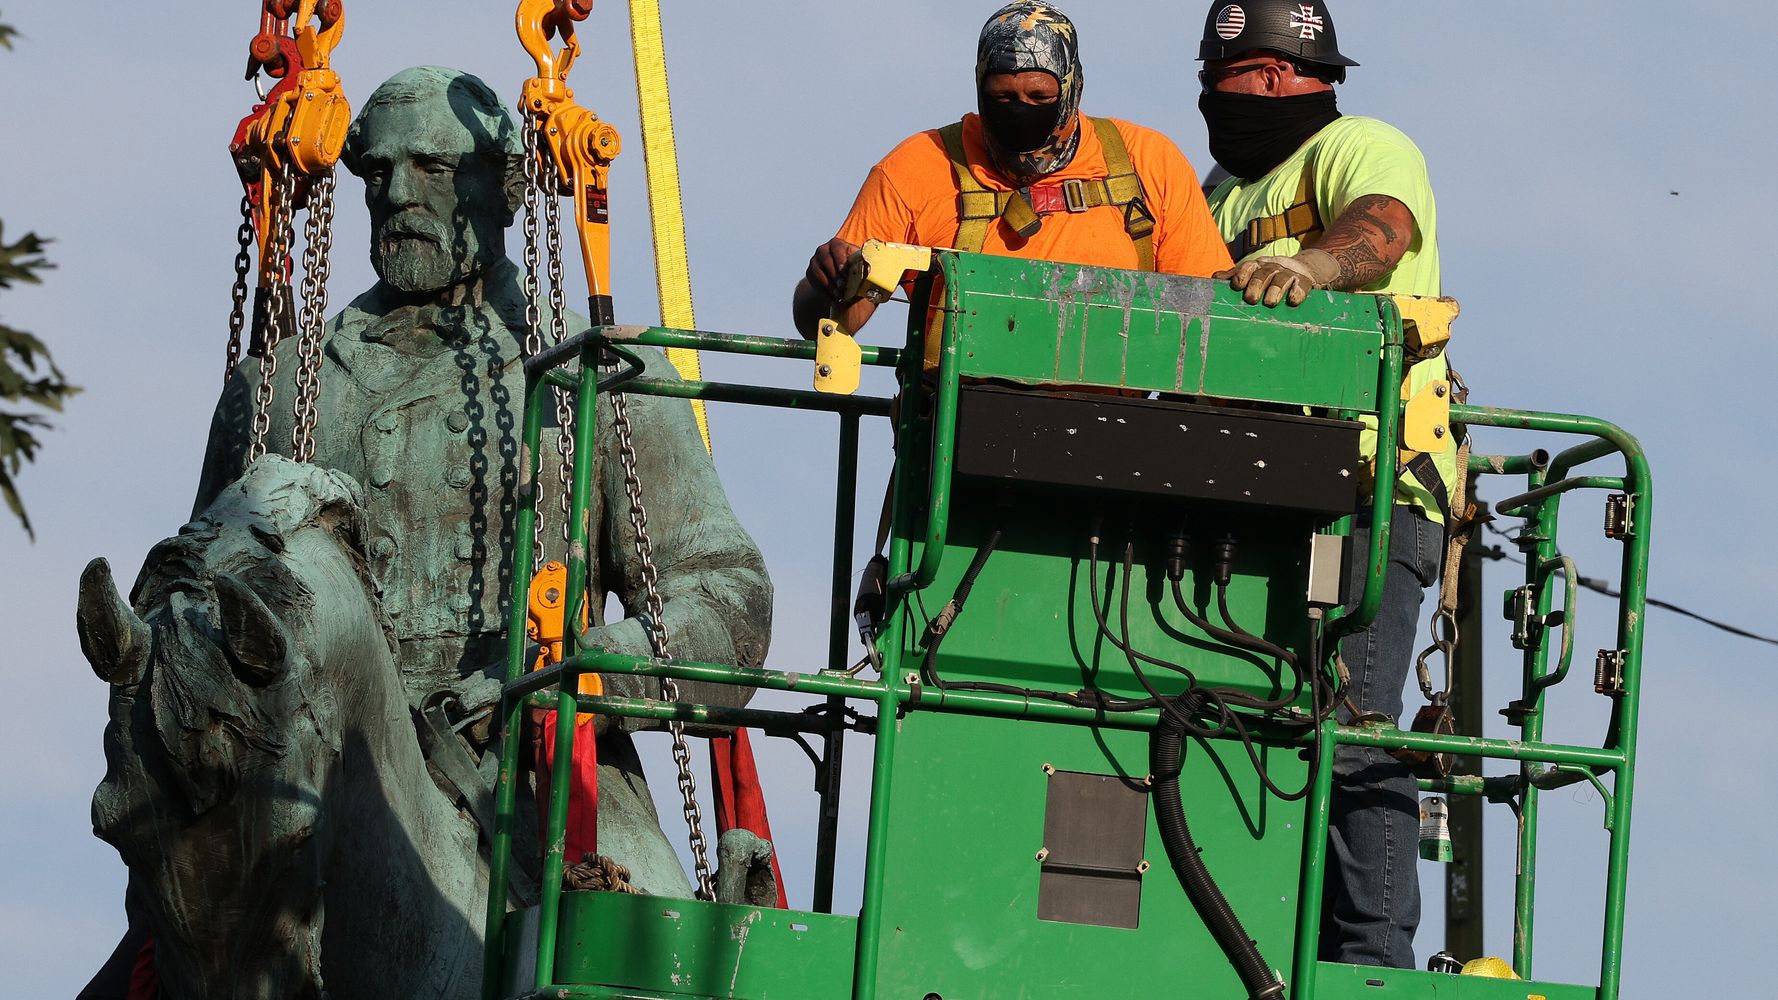 Robert E. Lee Statue That Inspired Infamous White Supremacist Rally Has Finally Been Removed